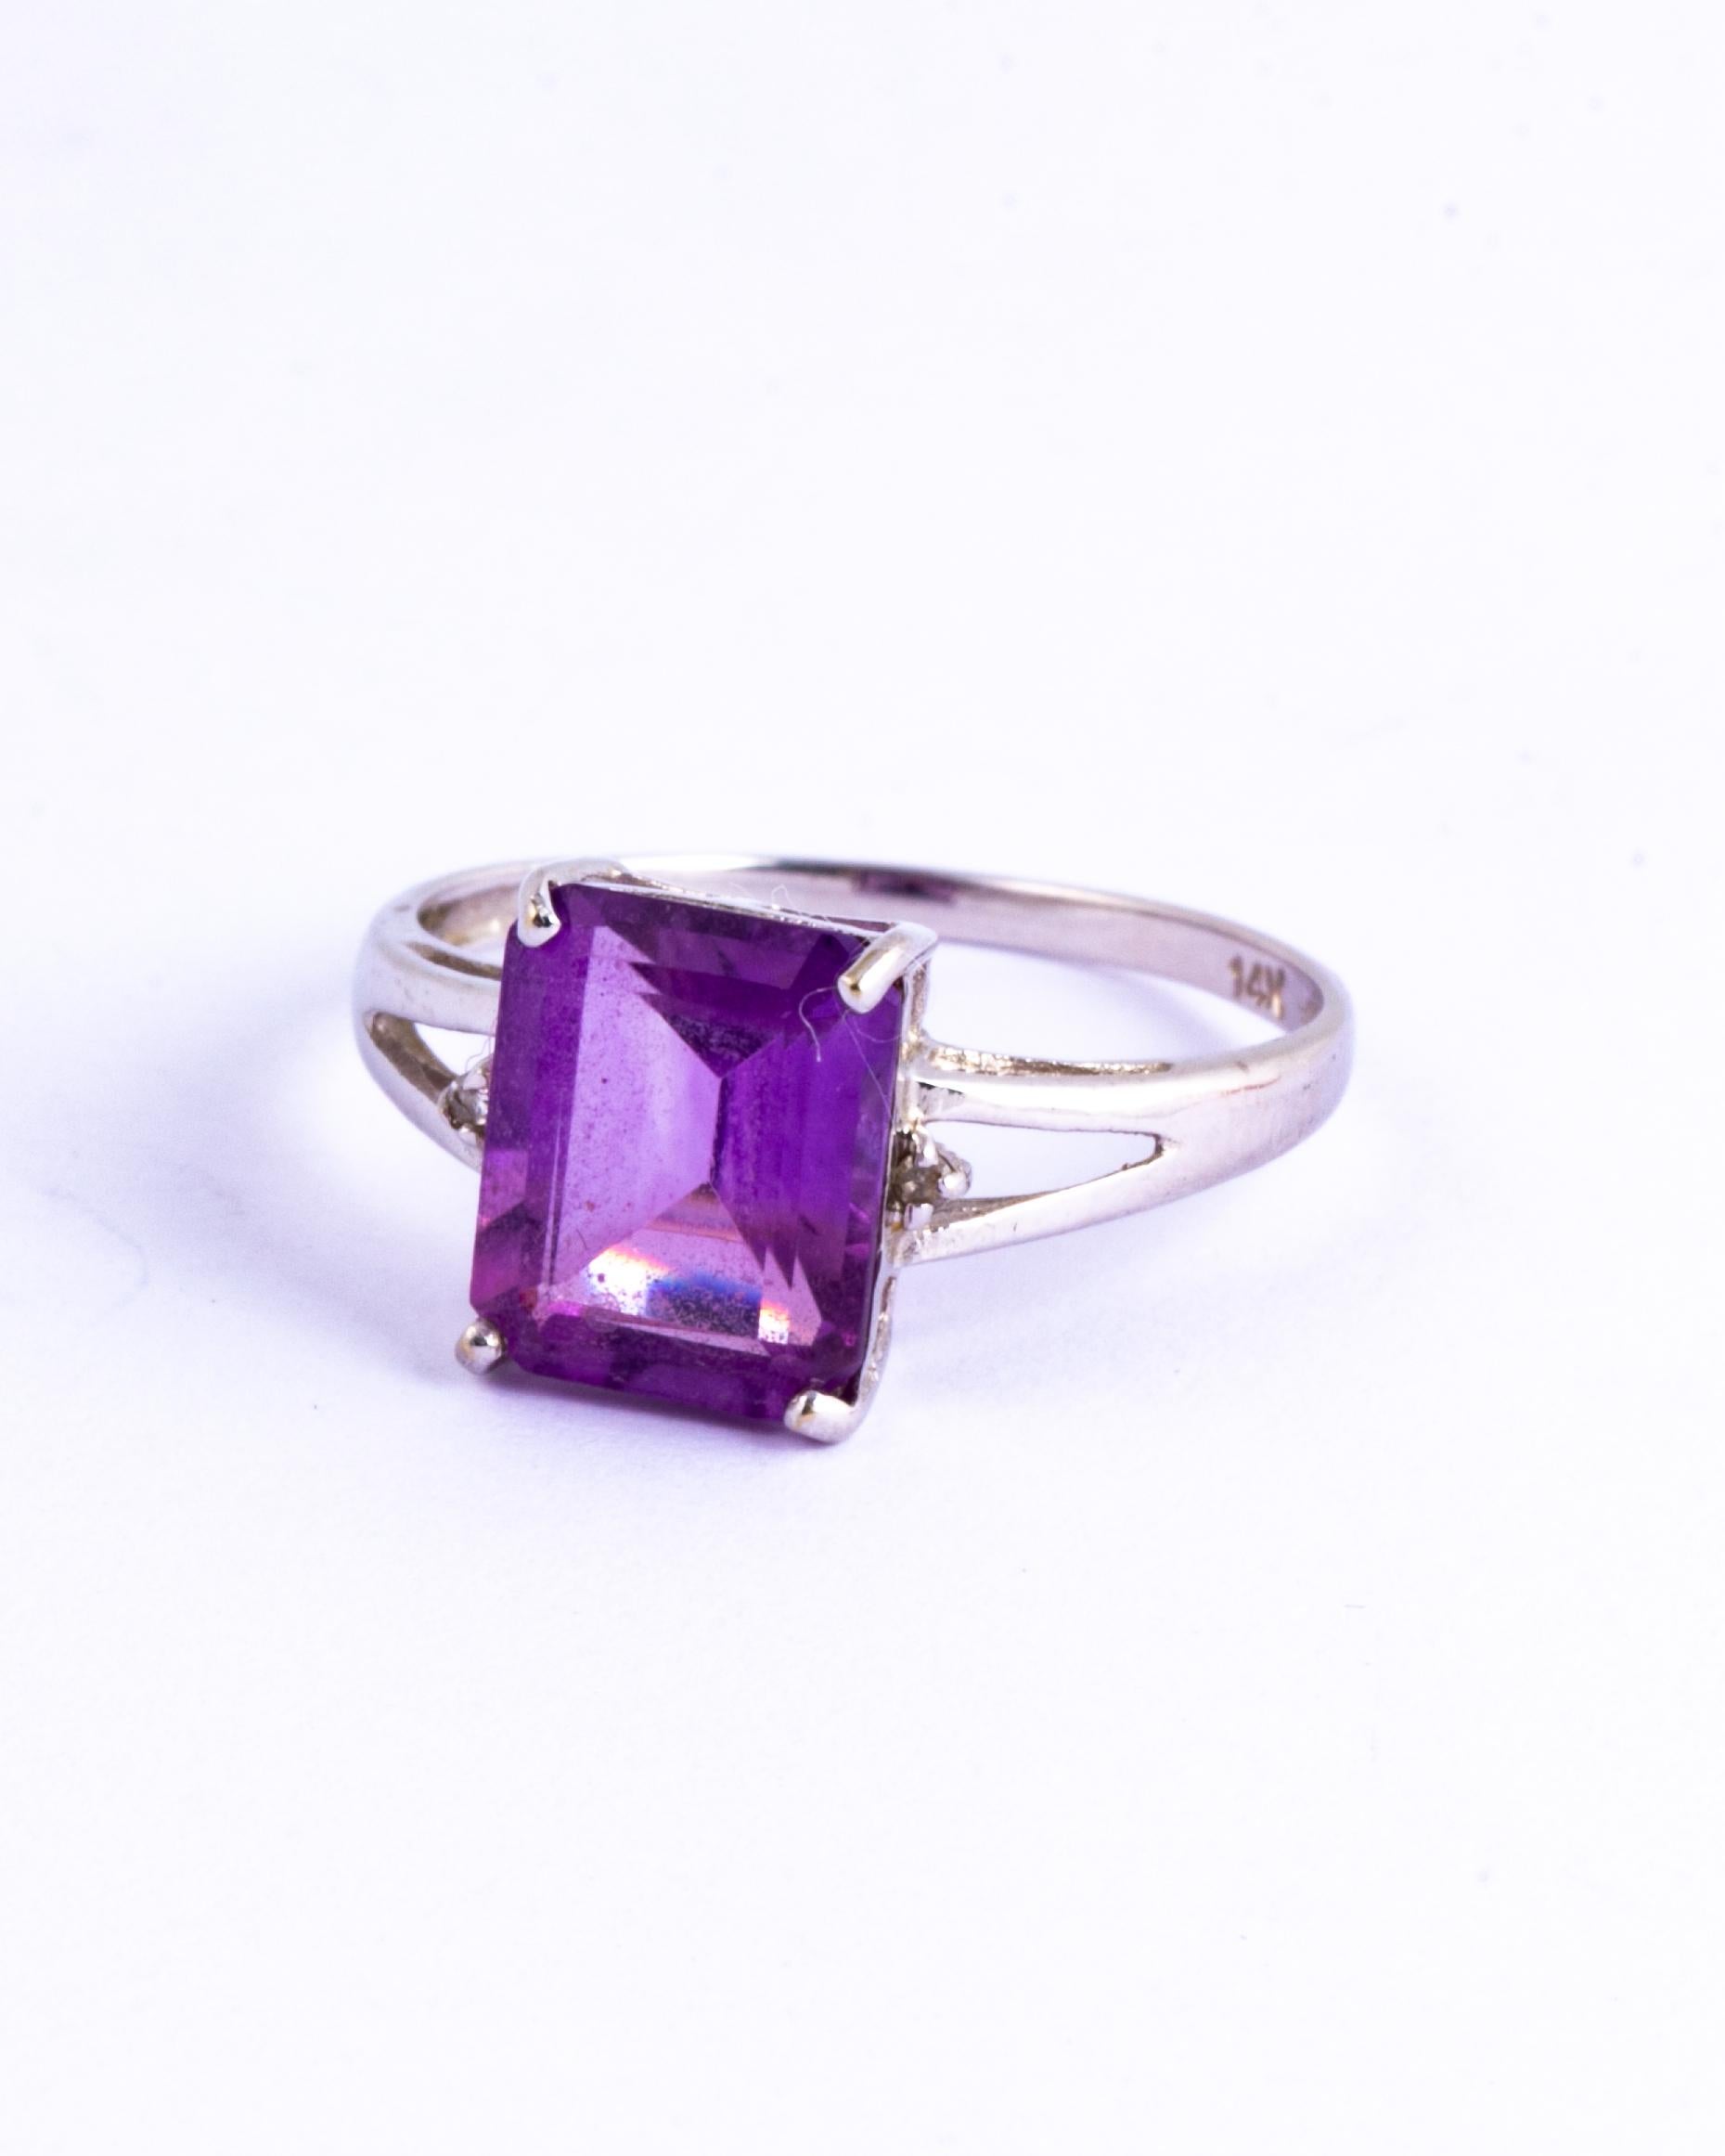 This gorgeous amethyst stone is bright purple and reflects the light in a beautiful way. Either side of the central stone there are single diamond points. 

Ring Size: O 1/2 or 7 1/2 
Stone Dimensions: 8x9mm 

Weight: 1.7g